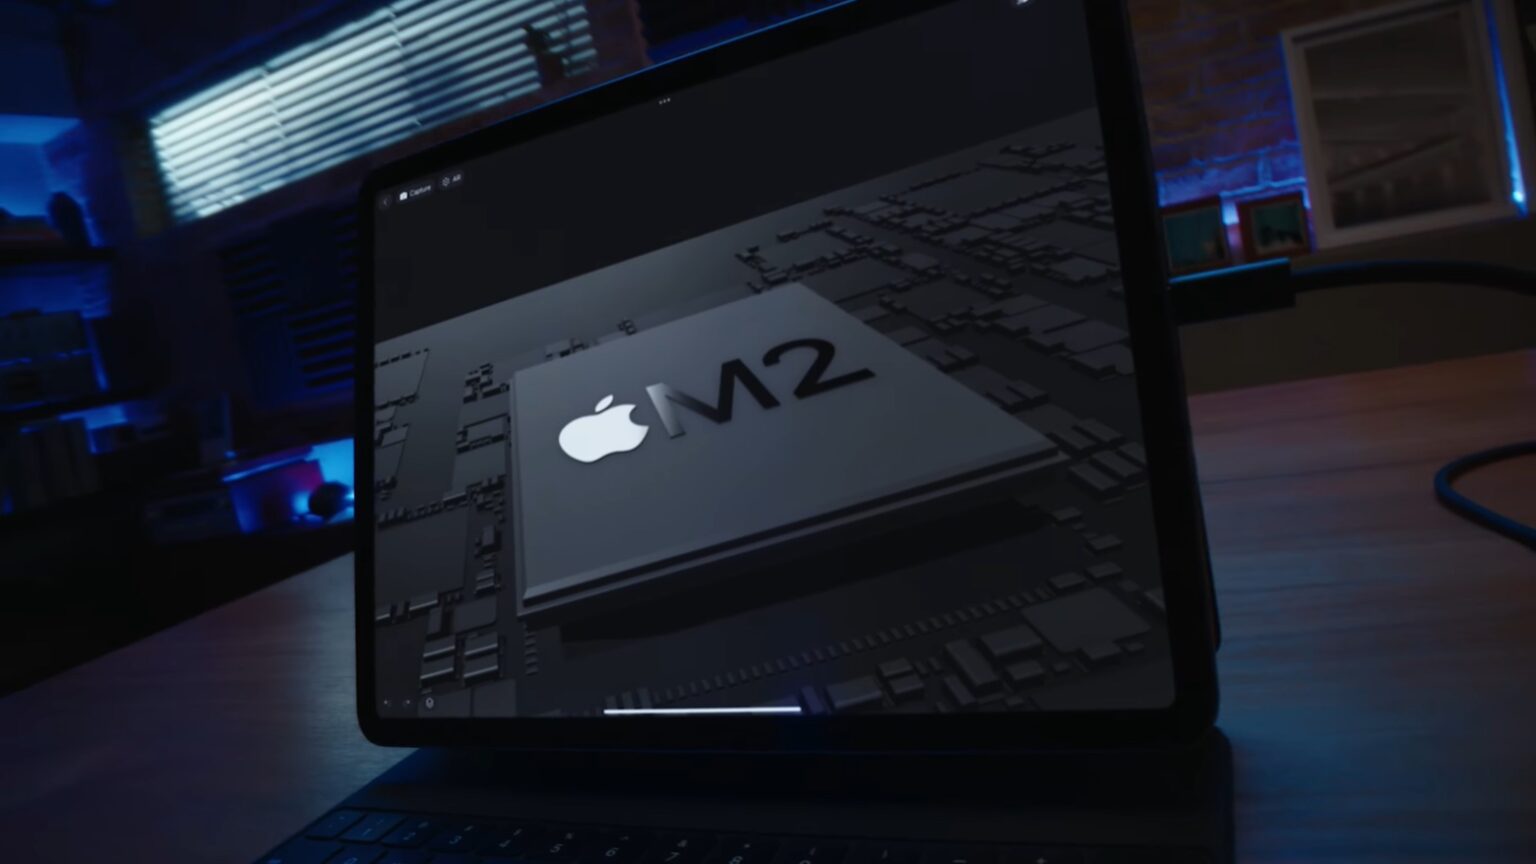 The highlight of the 2022 iPad Pro is the Apple M2 processor.